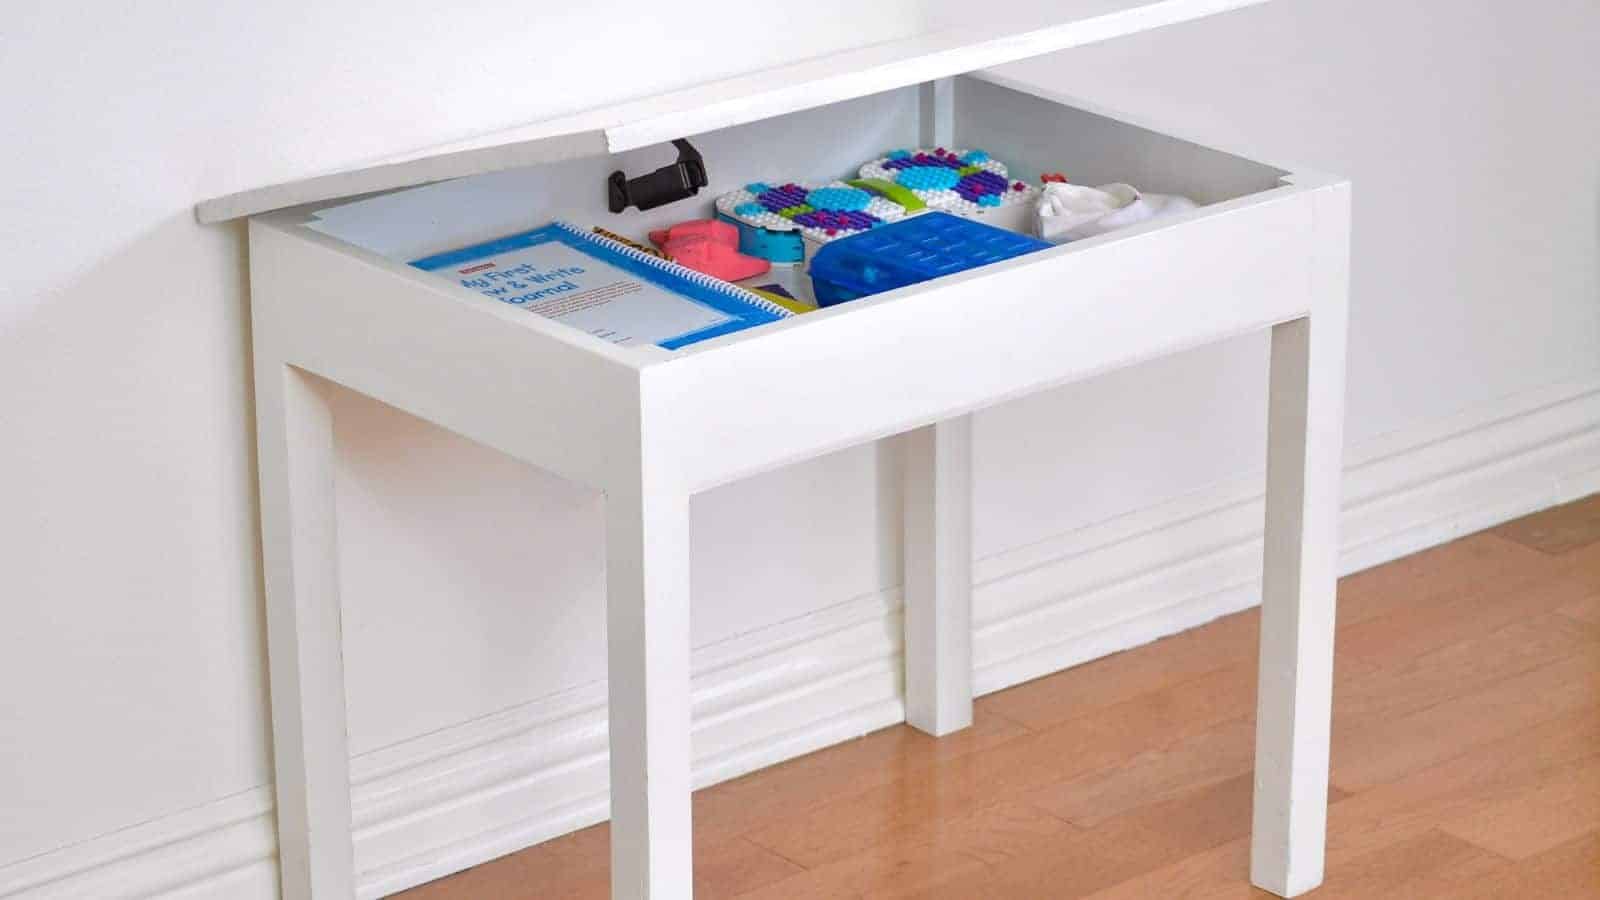 <p>Having their own space to do homework and be creative is key to a child’s development. This DIY kid’s table even has hidden storage, so all their papers and supplies can be hidden away when they’re done. The soft-close hinge makes it safe for little fingers. <a href="https://www.anikasdiylife.com/diy-kids-table-with-storage/">Make this easy beginner woodworking project!</a></p>